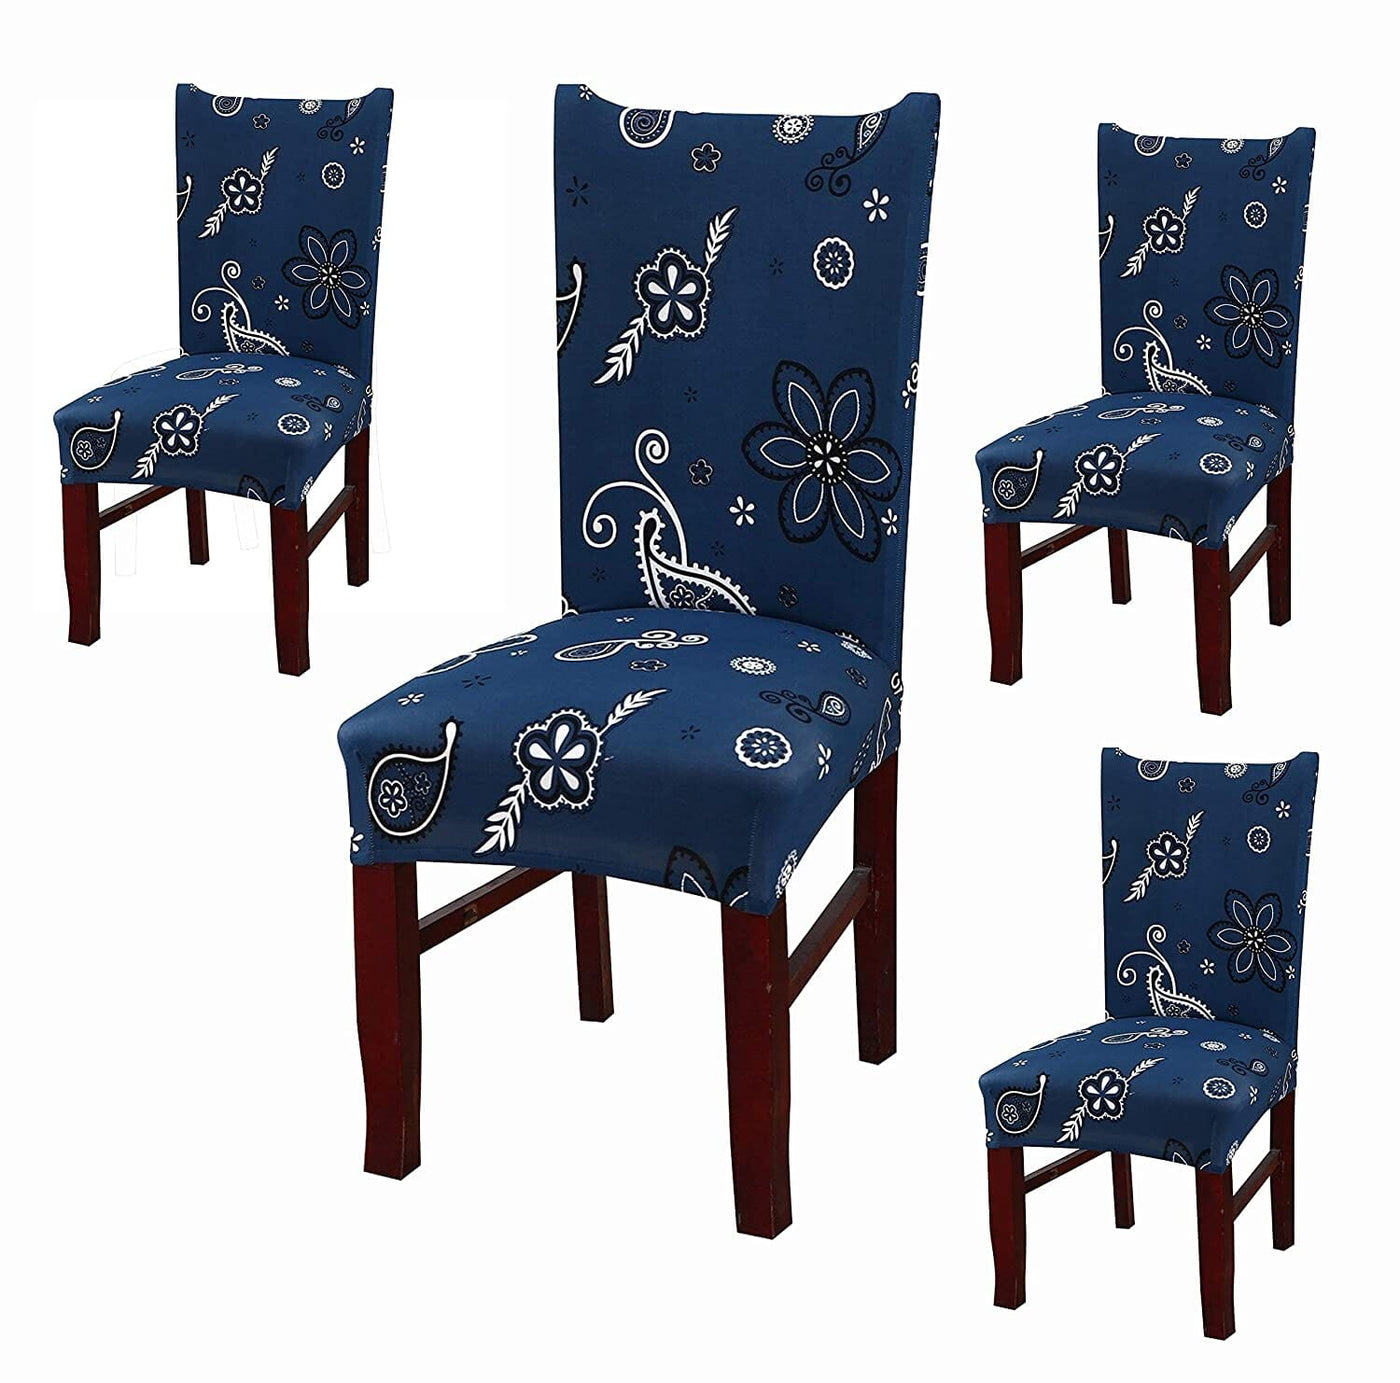 Dark Blue Paisley Premium Chair Cover - Stretchable & Elastic Fitted Great Happy IN 4 PCS - ₹1299 